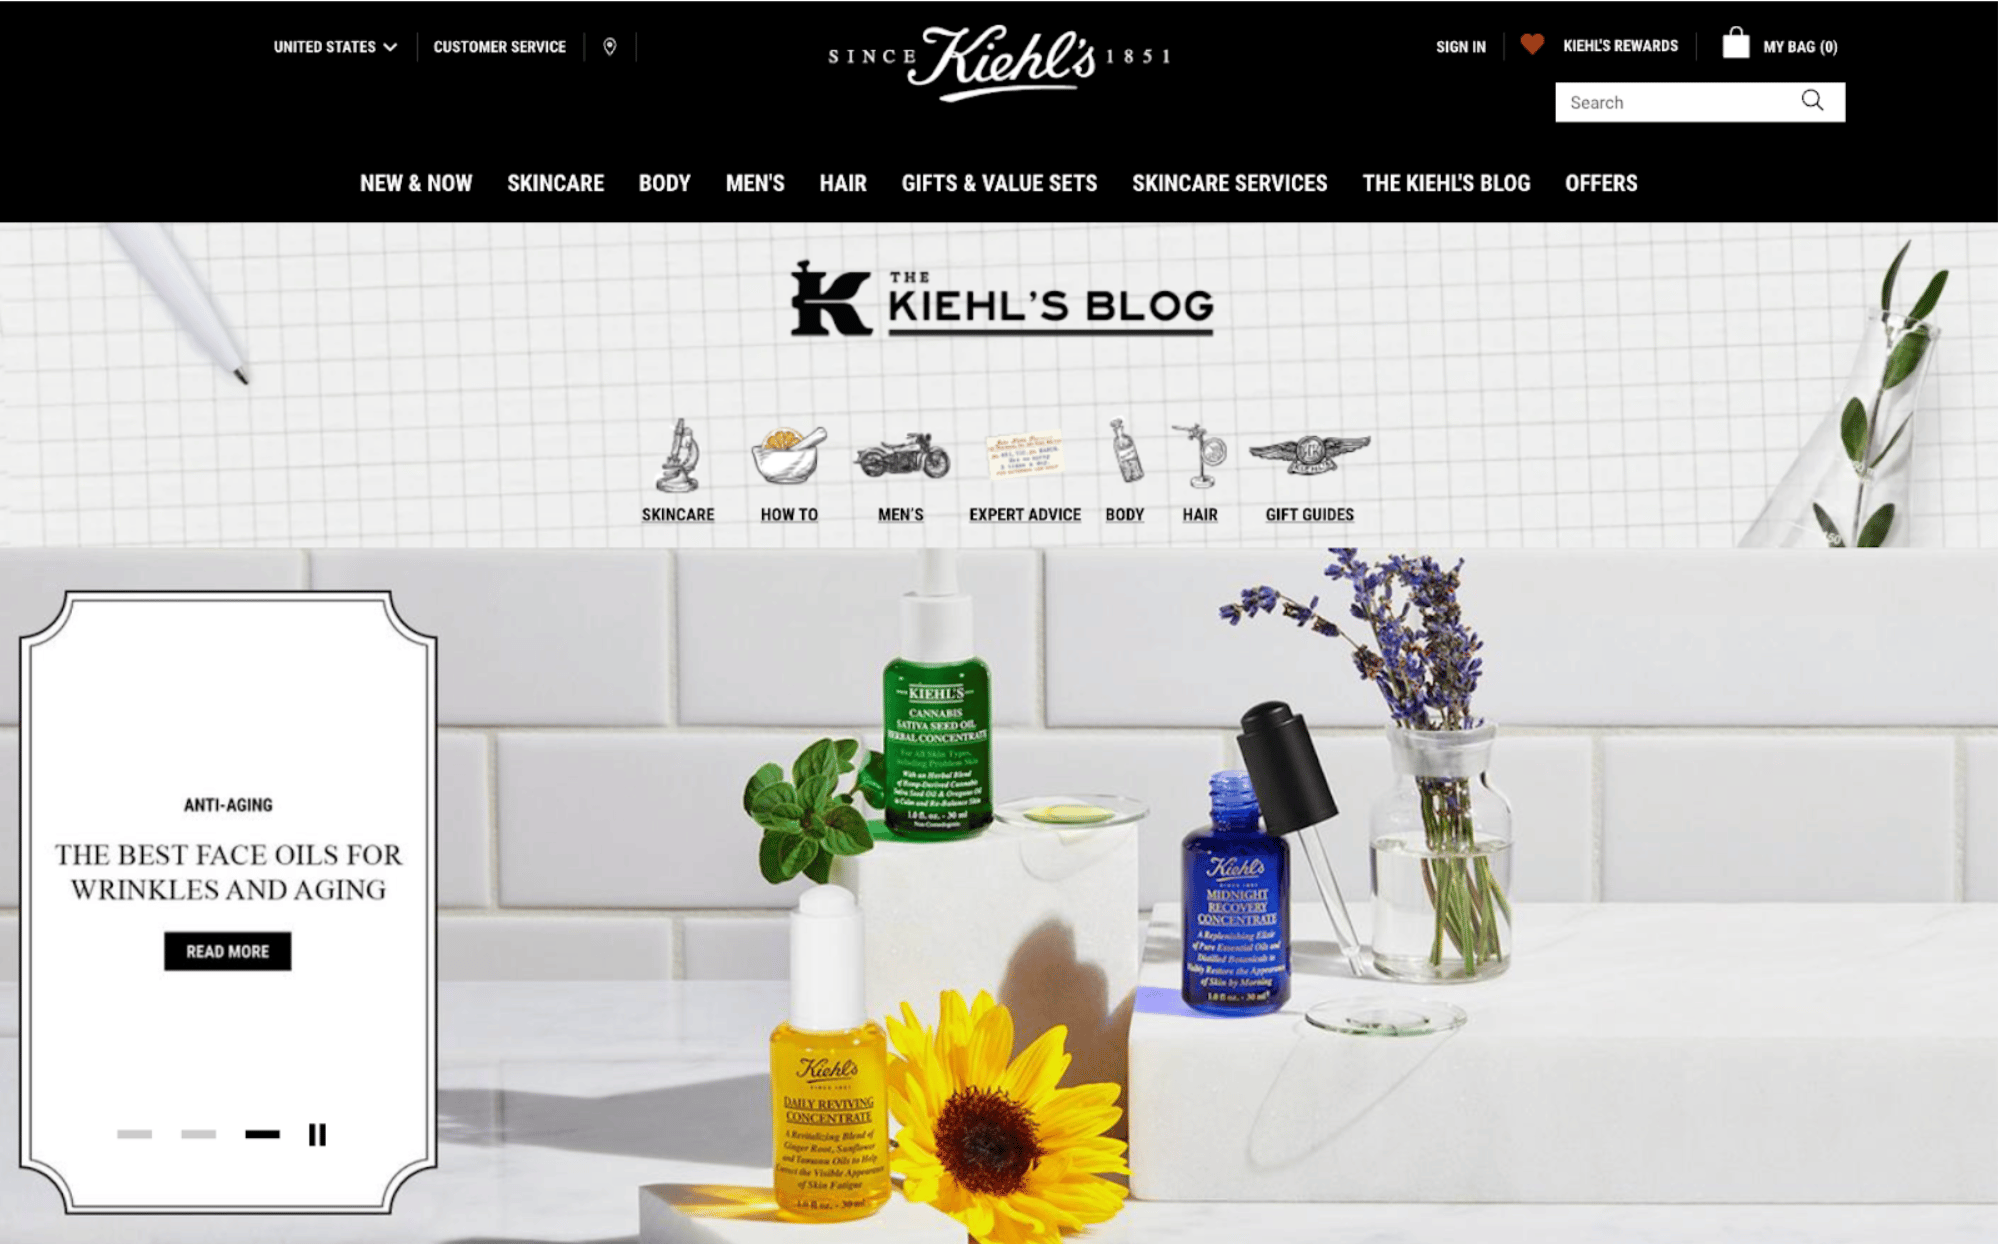 Kiehl's blog page is organized for ease of use and optimizations for content marketing